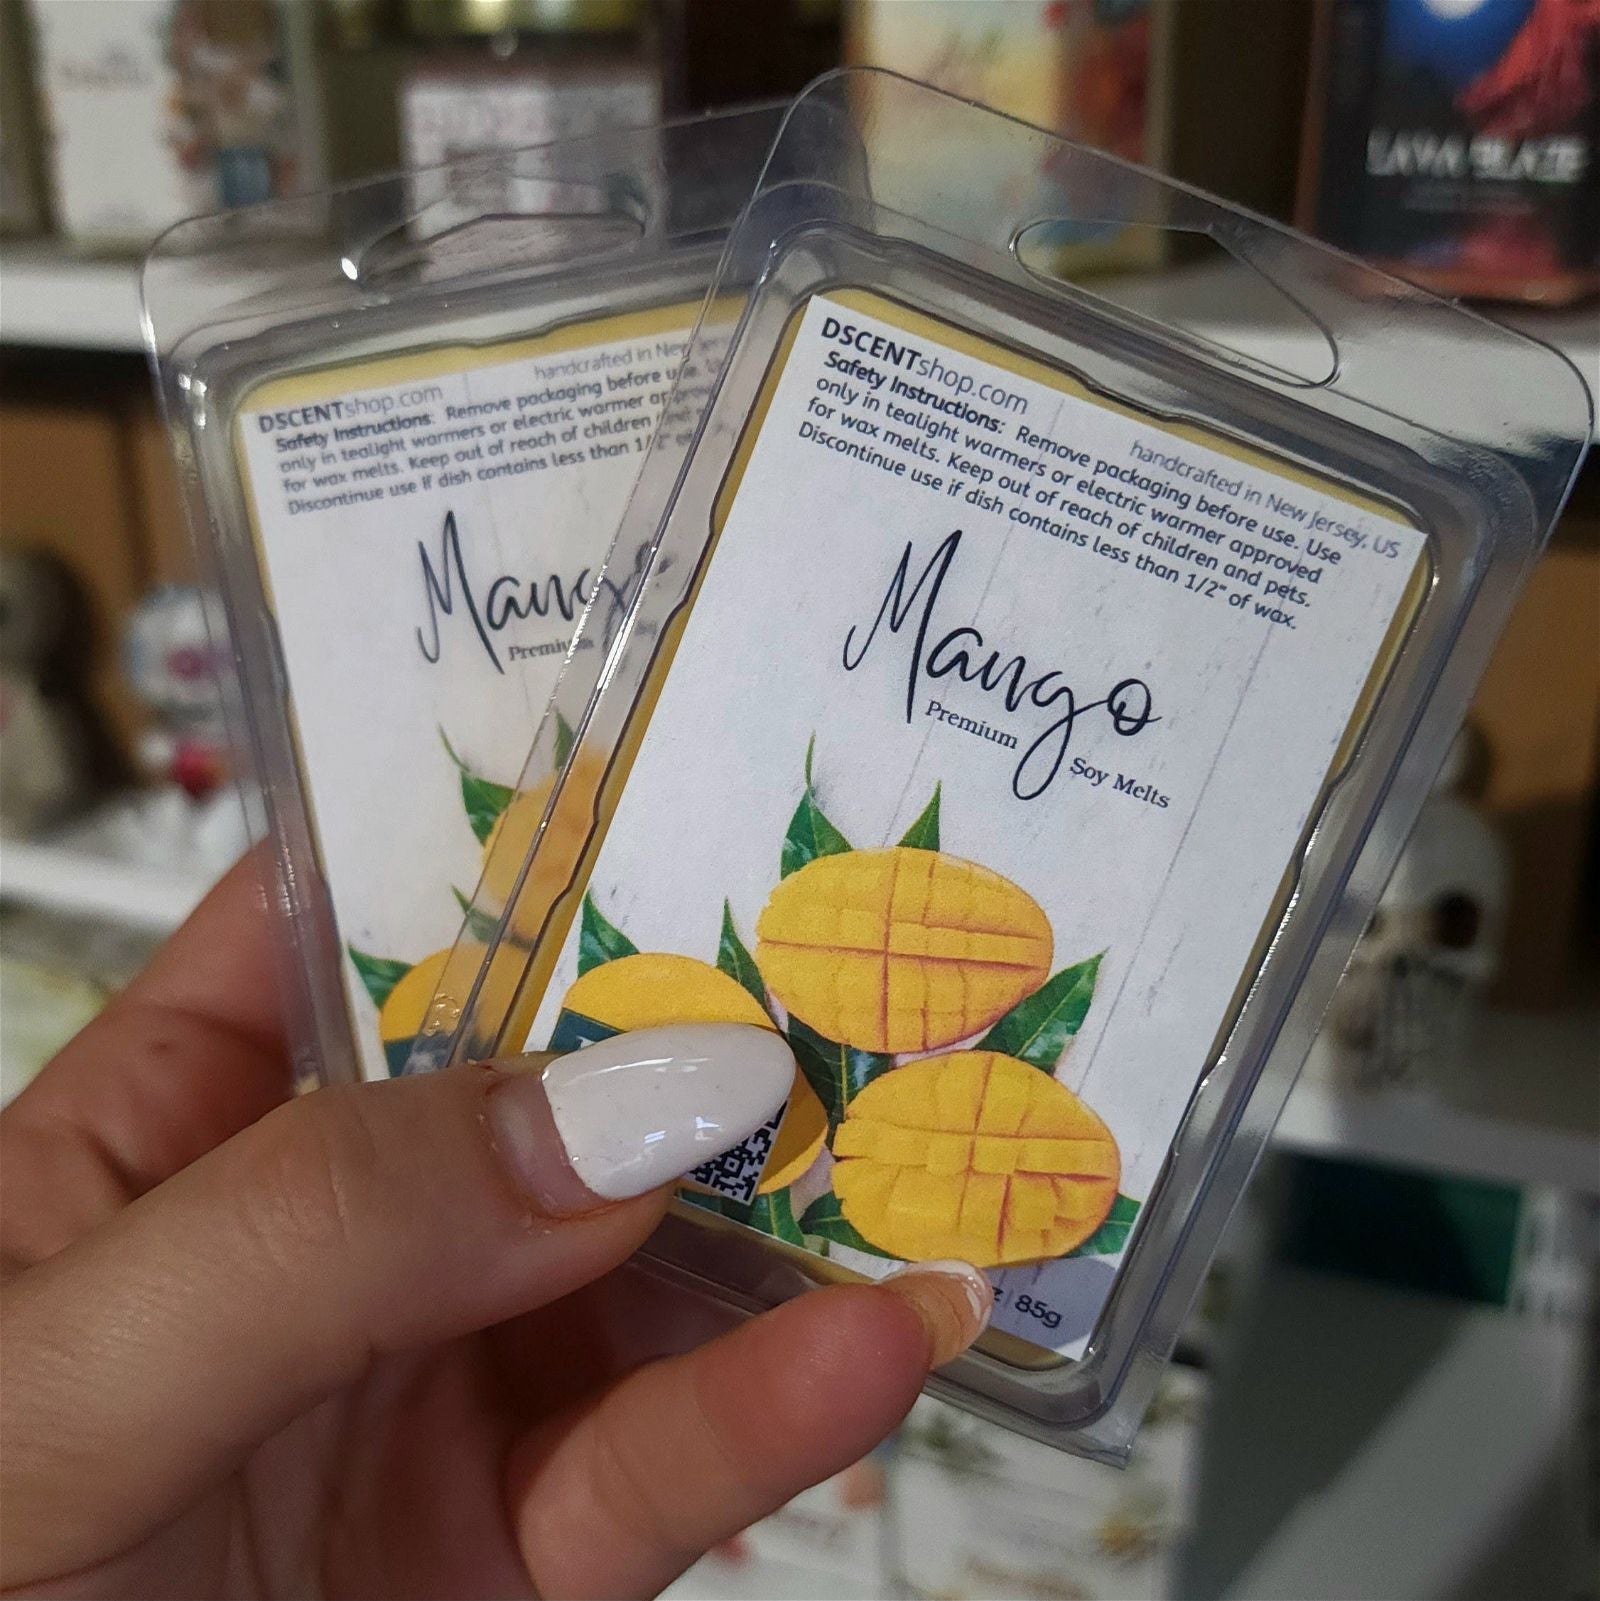 Soy Wax Melts | Clamshell and Boxes - D SCENT 